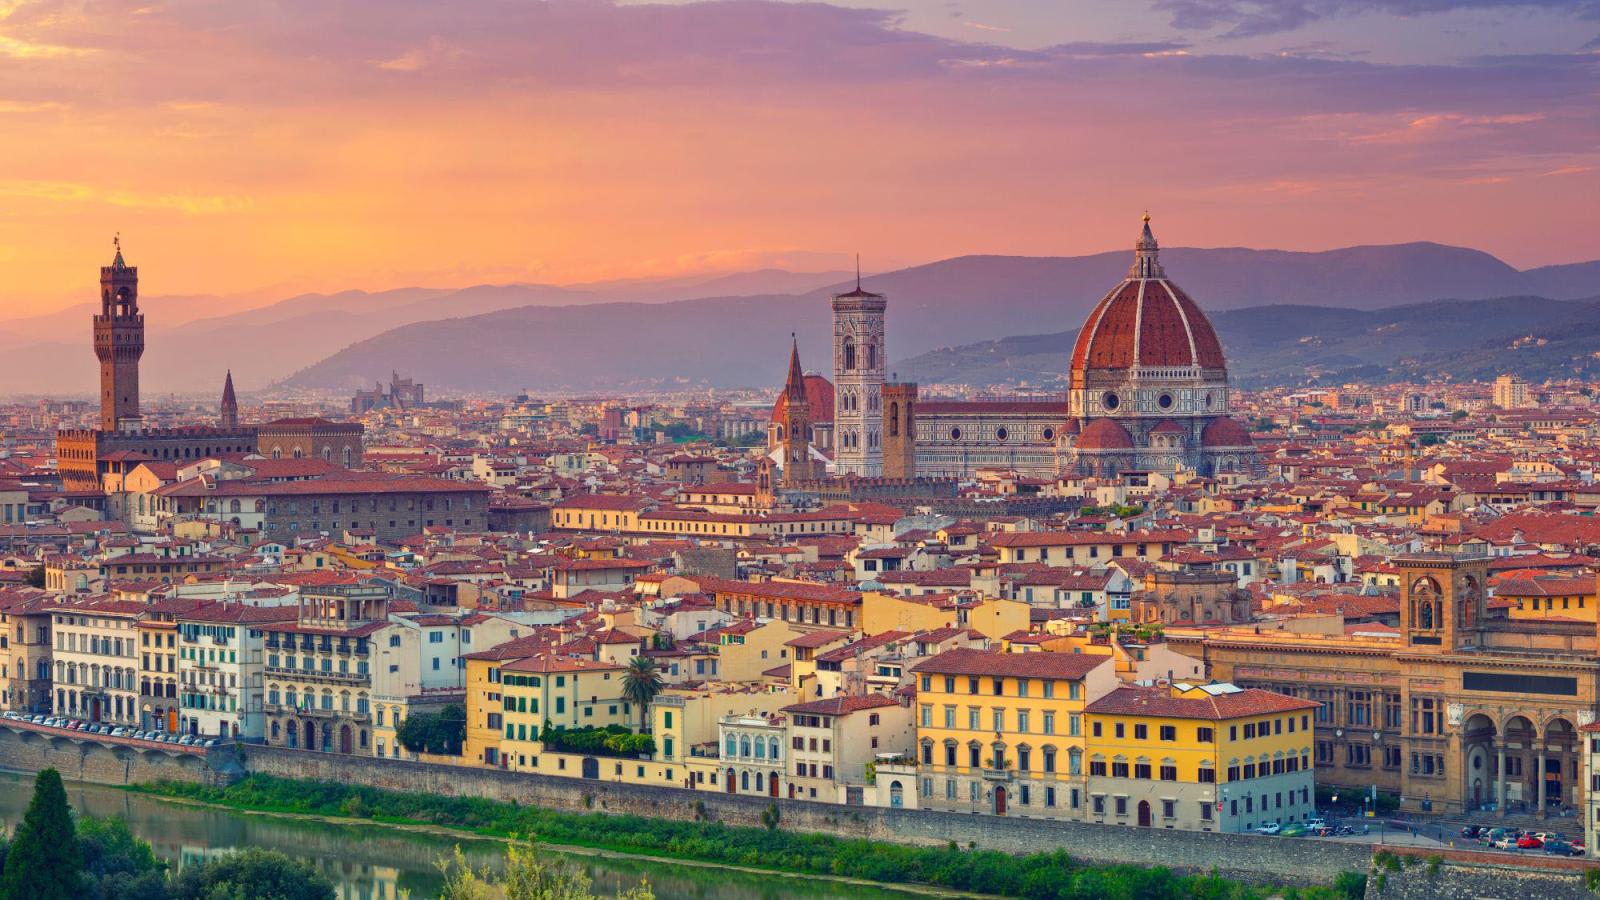 panoramic view of the city of Florence, Italy